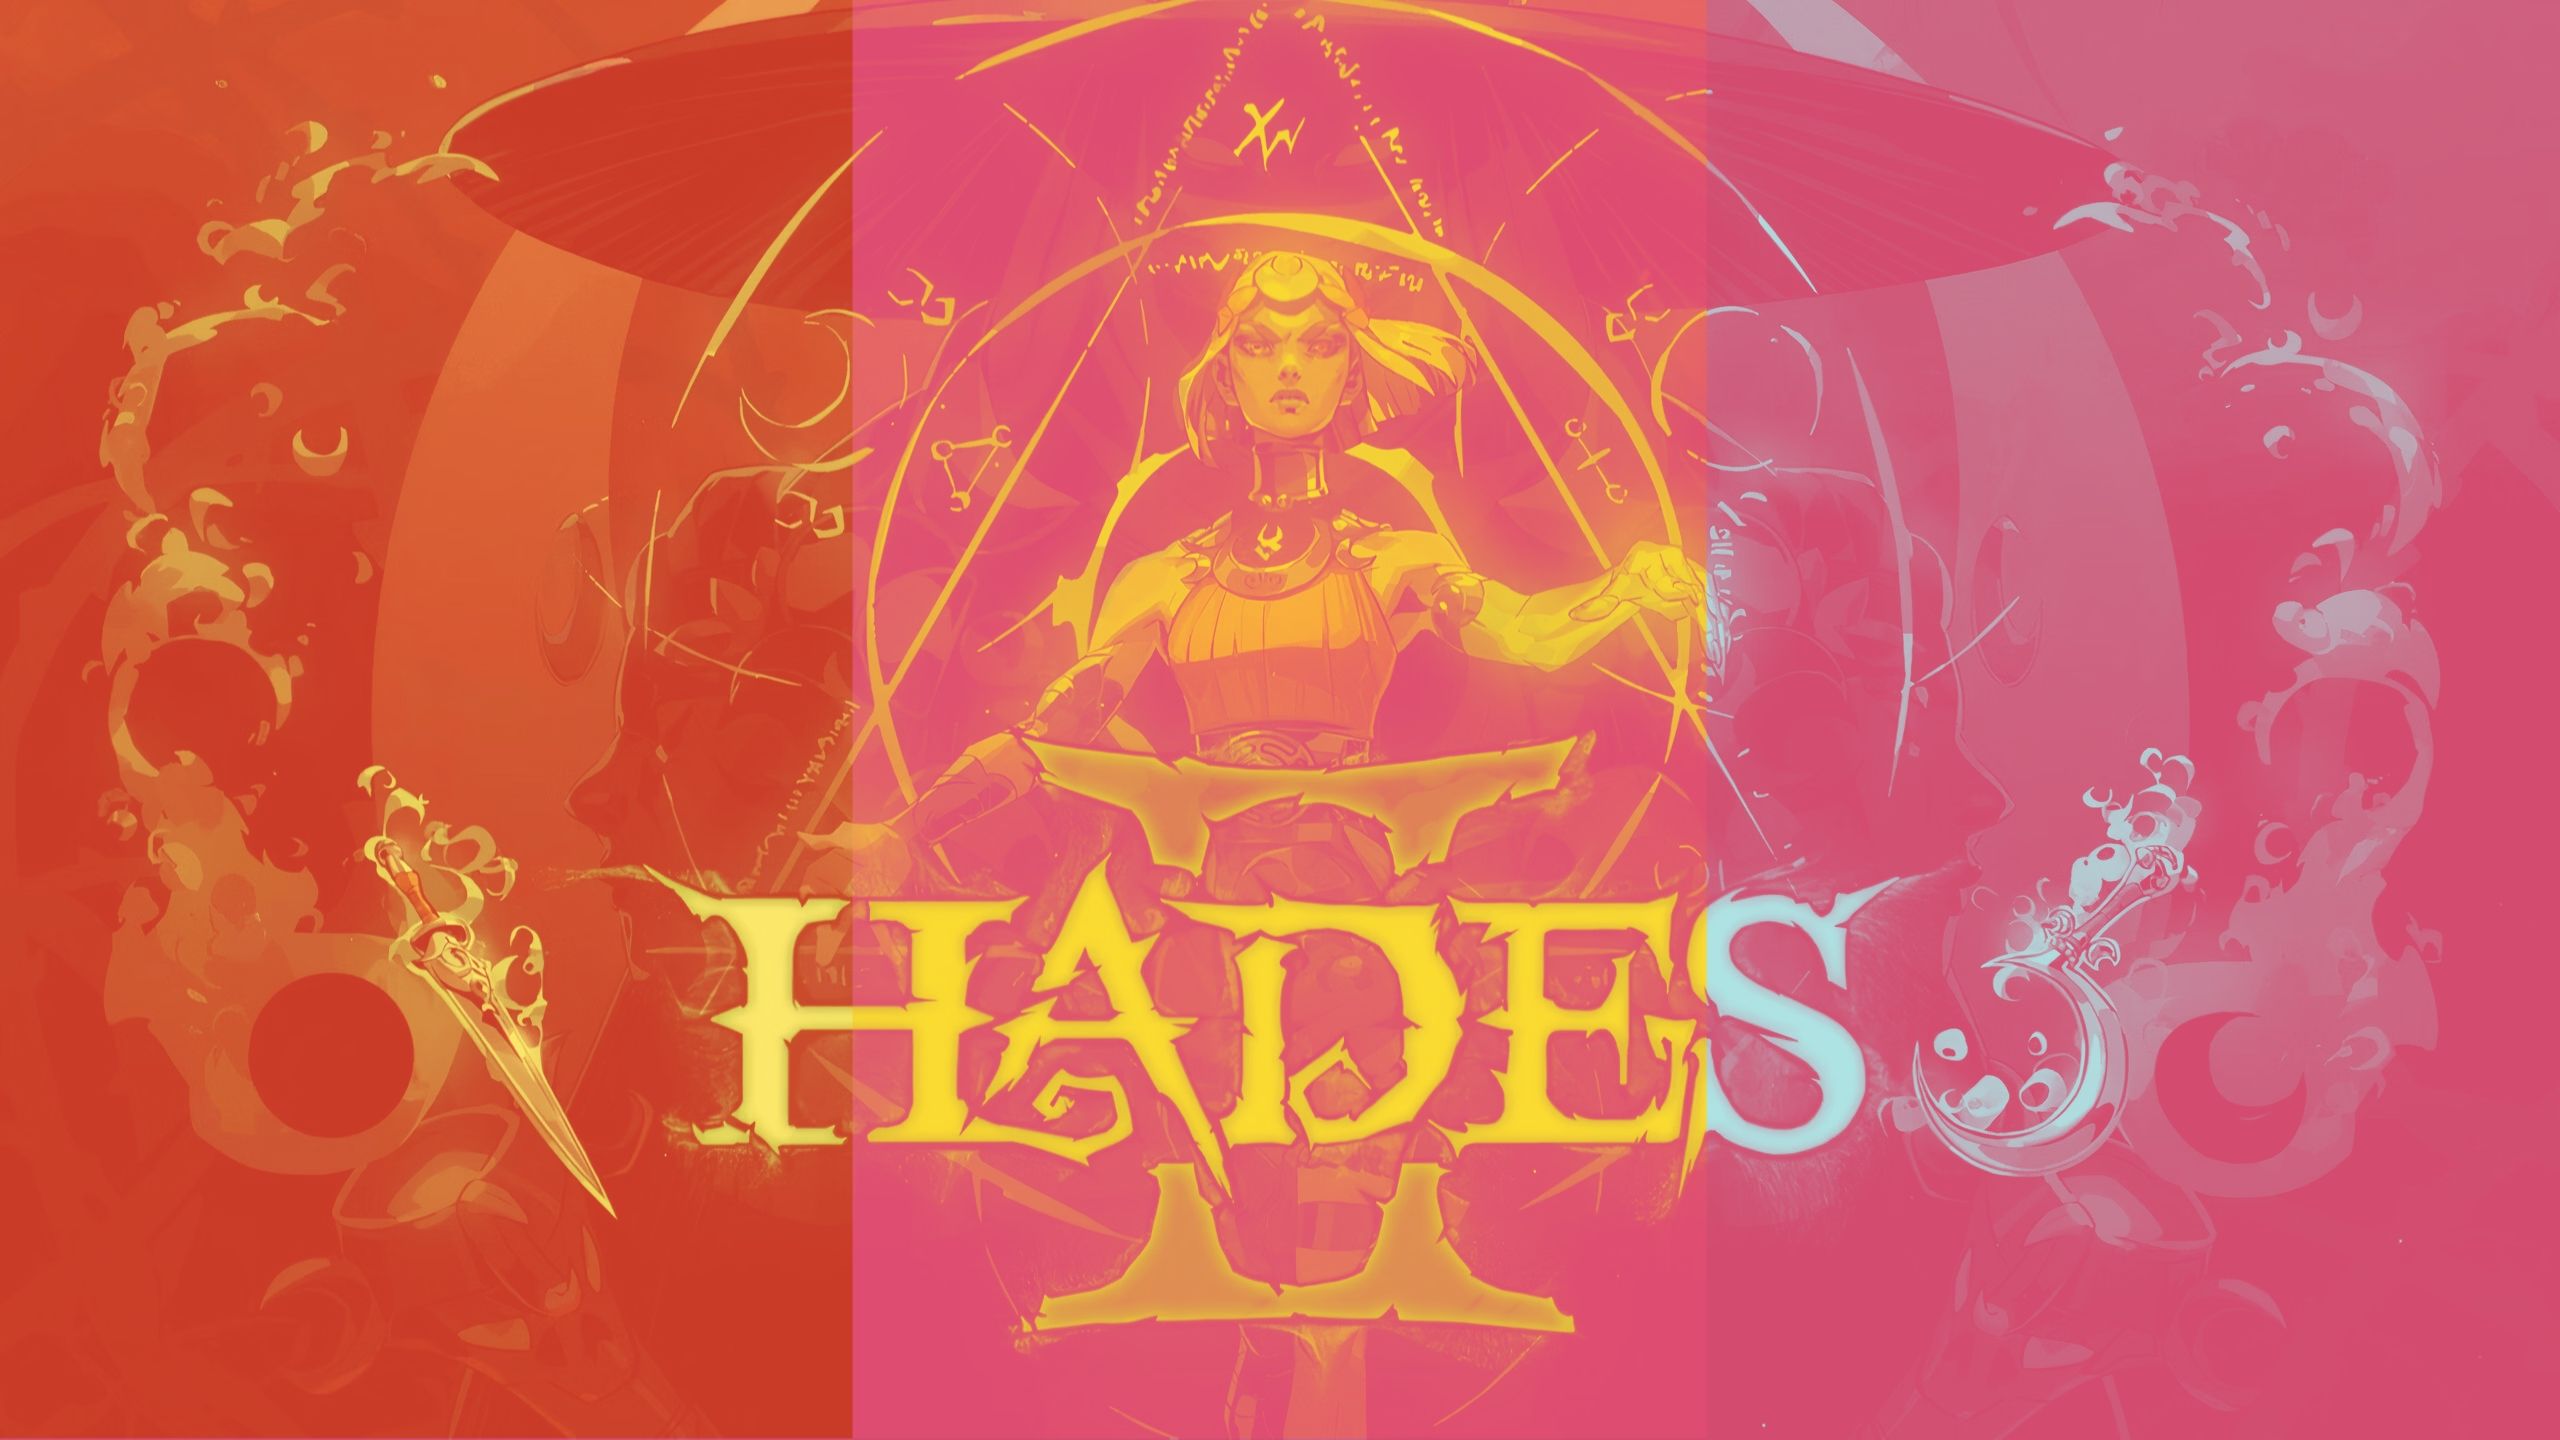 hades 2 featured image with three tones